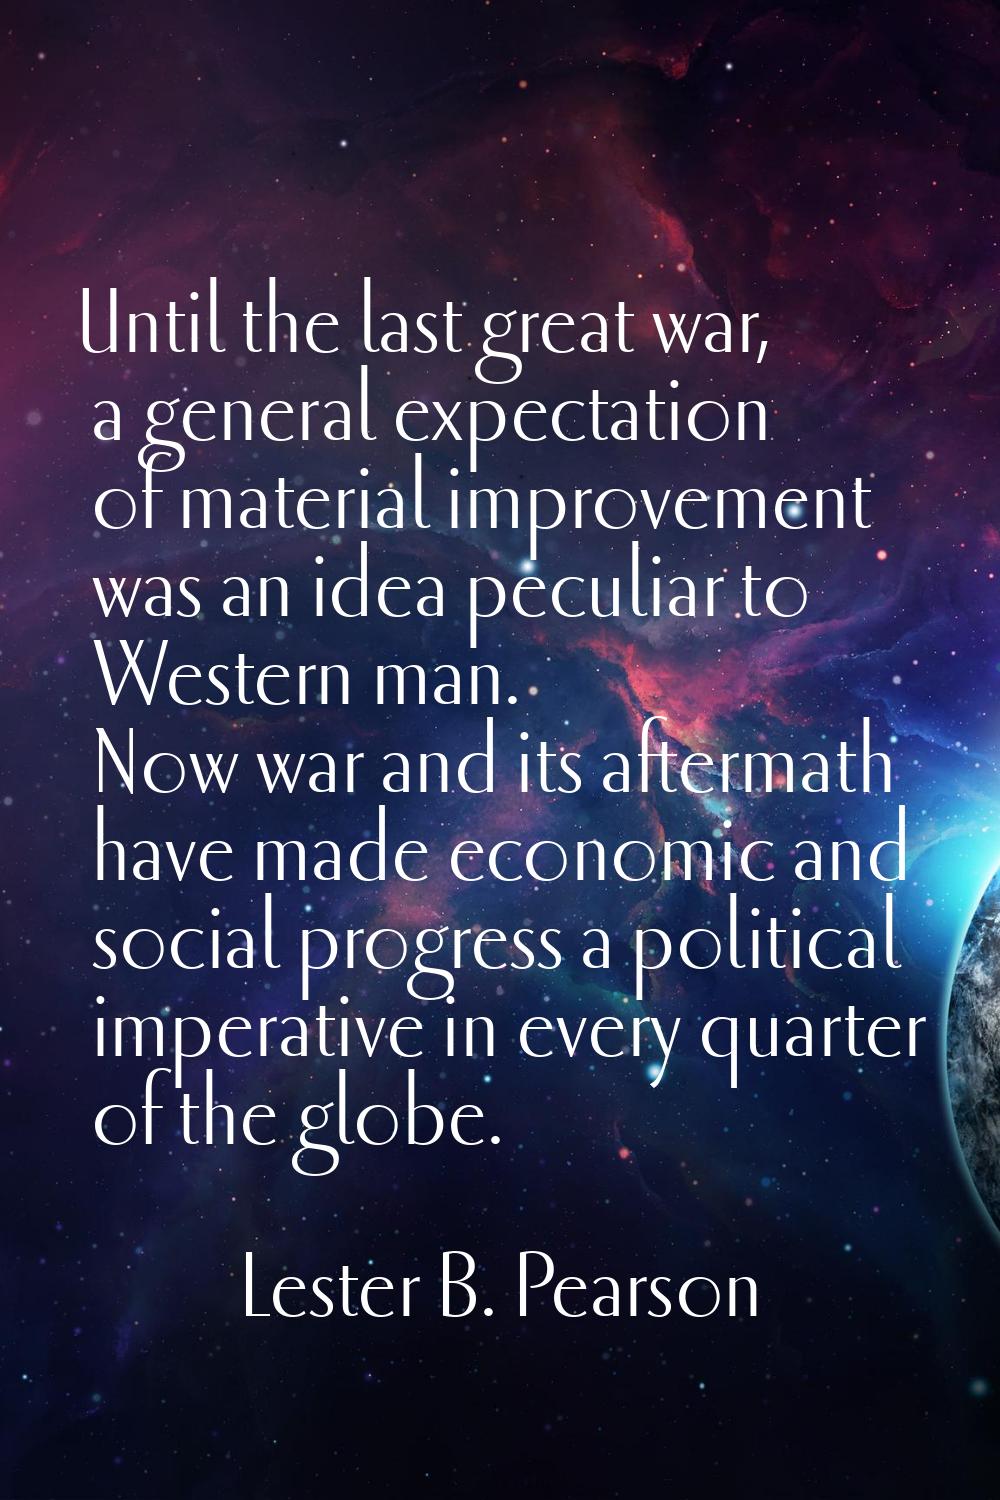 Until the last great war, a general expectation of material improvement was an idea peculiar to Wes